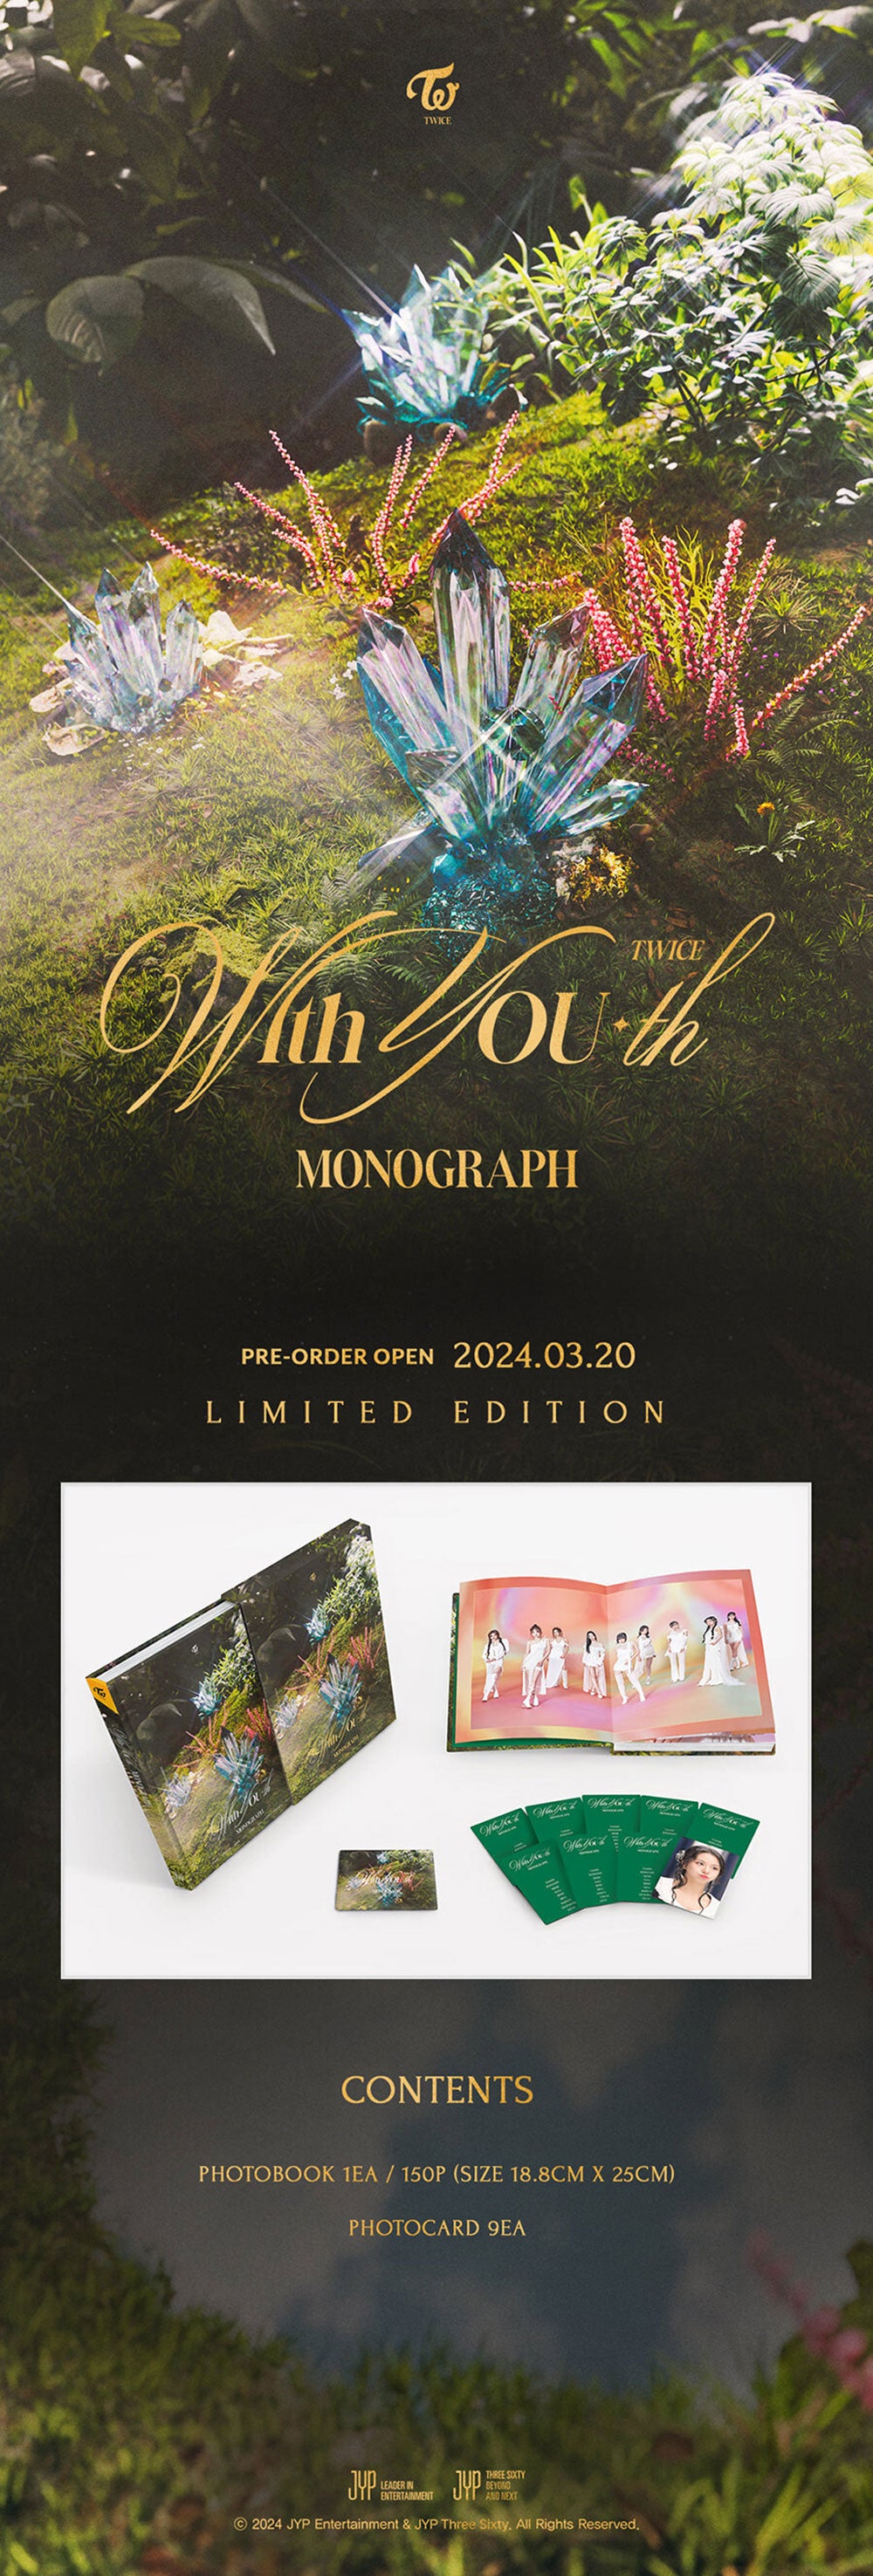 TWICE - With YOU-th [MONOGRAPH] - K PLACE